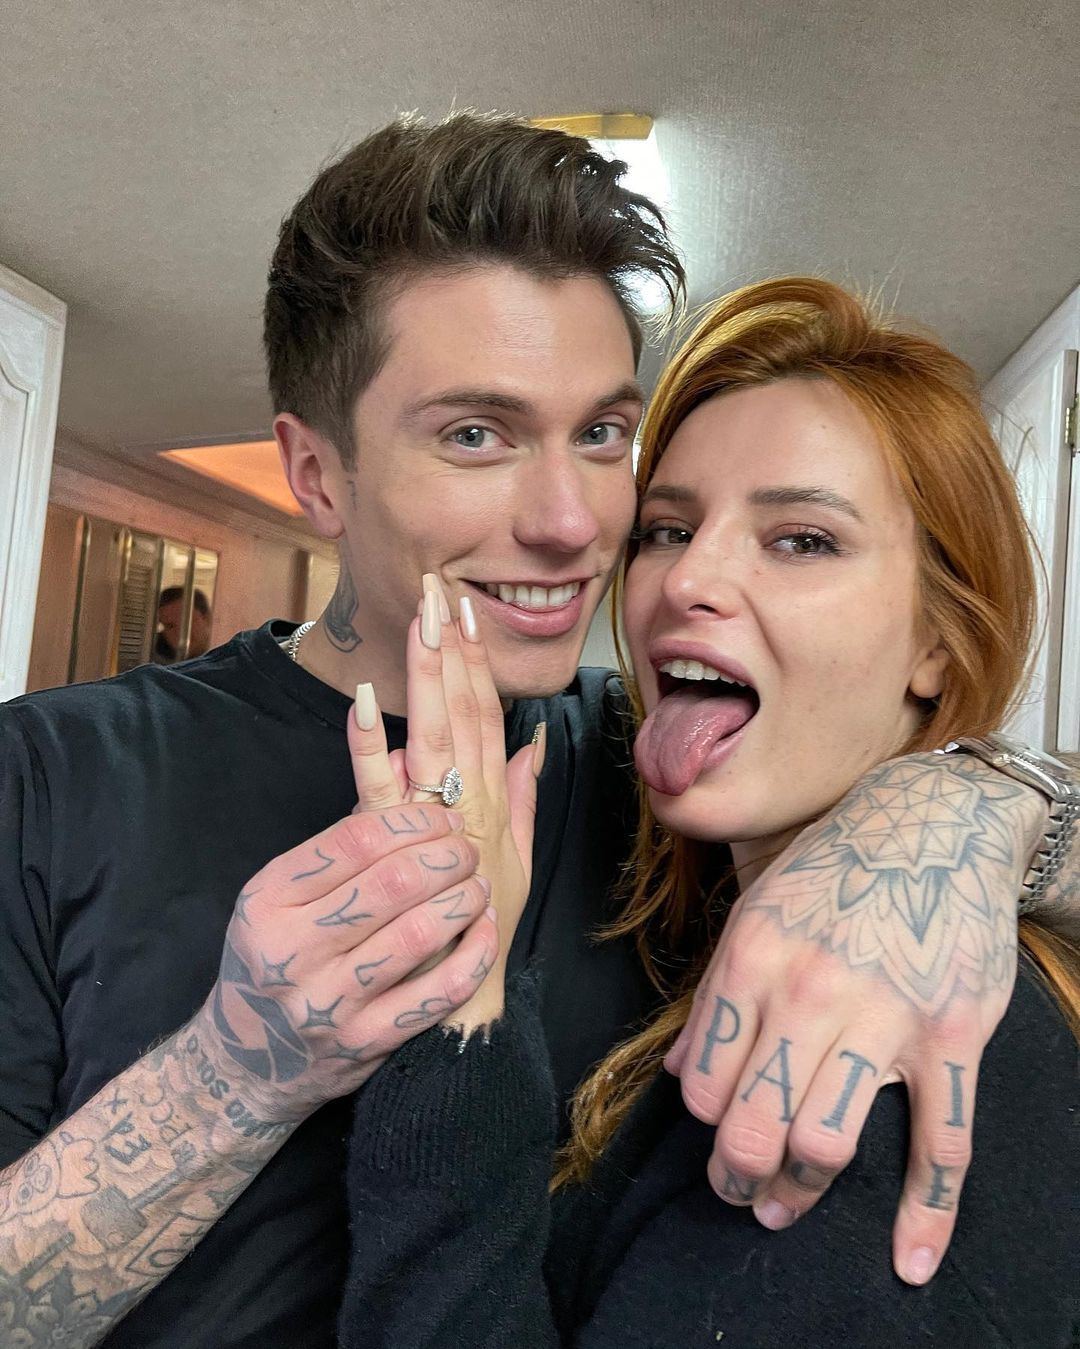 Bella Thorne sticks her tongue out and shows off engagement ring while Benjamin Mascolo puts his arm around her.